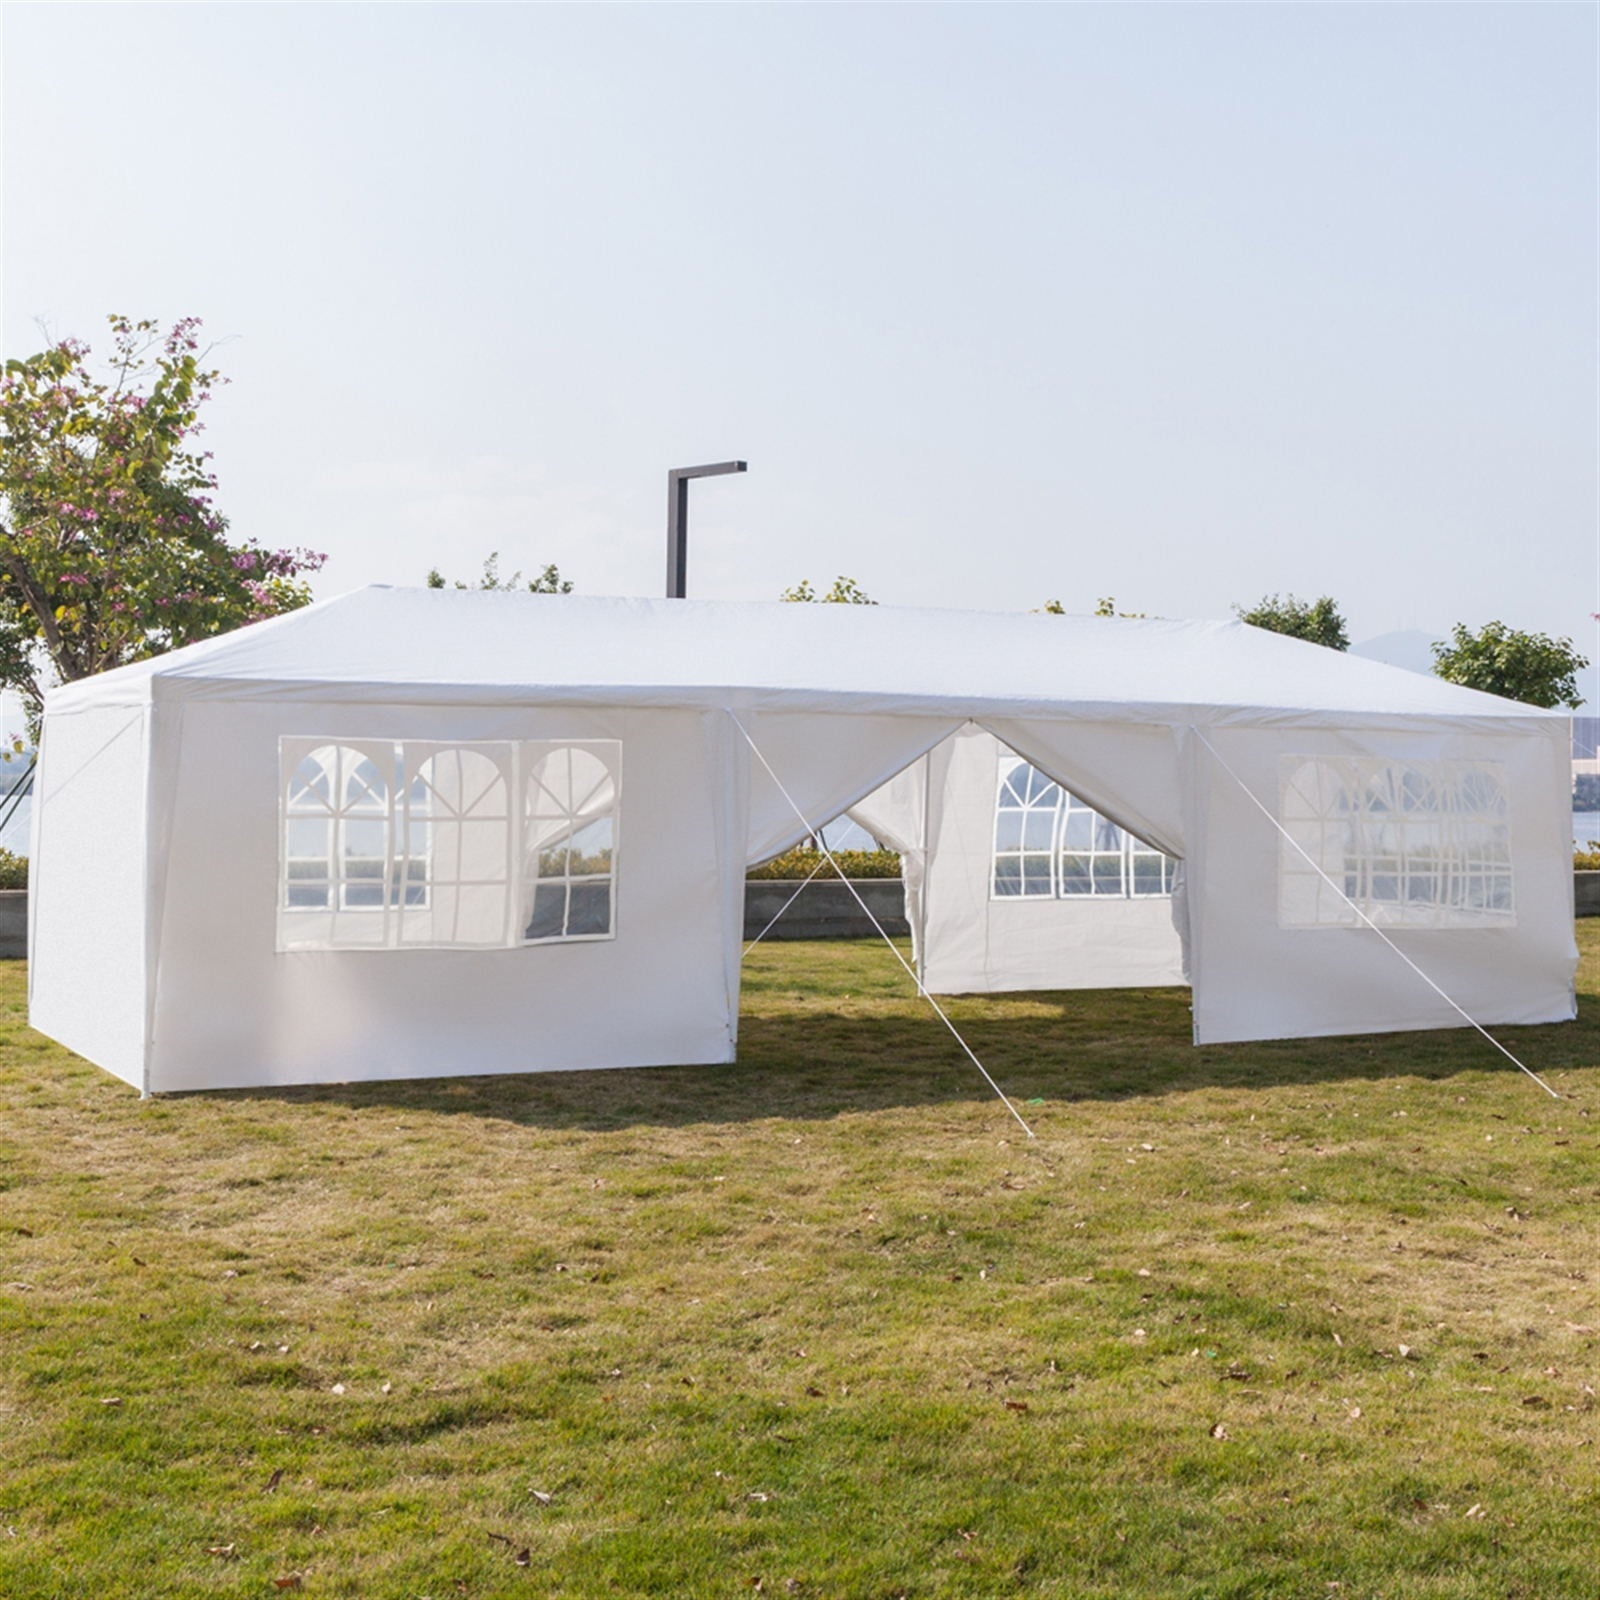 X XBEN 10' x 30'  Heavy Duty Canopy Tent Party Tent Outdoor Event Instant Tent Gazebo, Sturdy Steel Frame Shelter w/8 Removable Sidewalls and Carry Bag, White